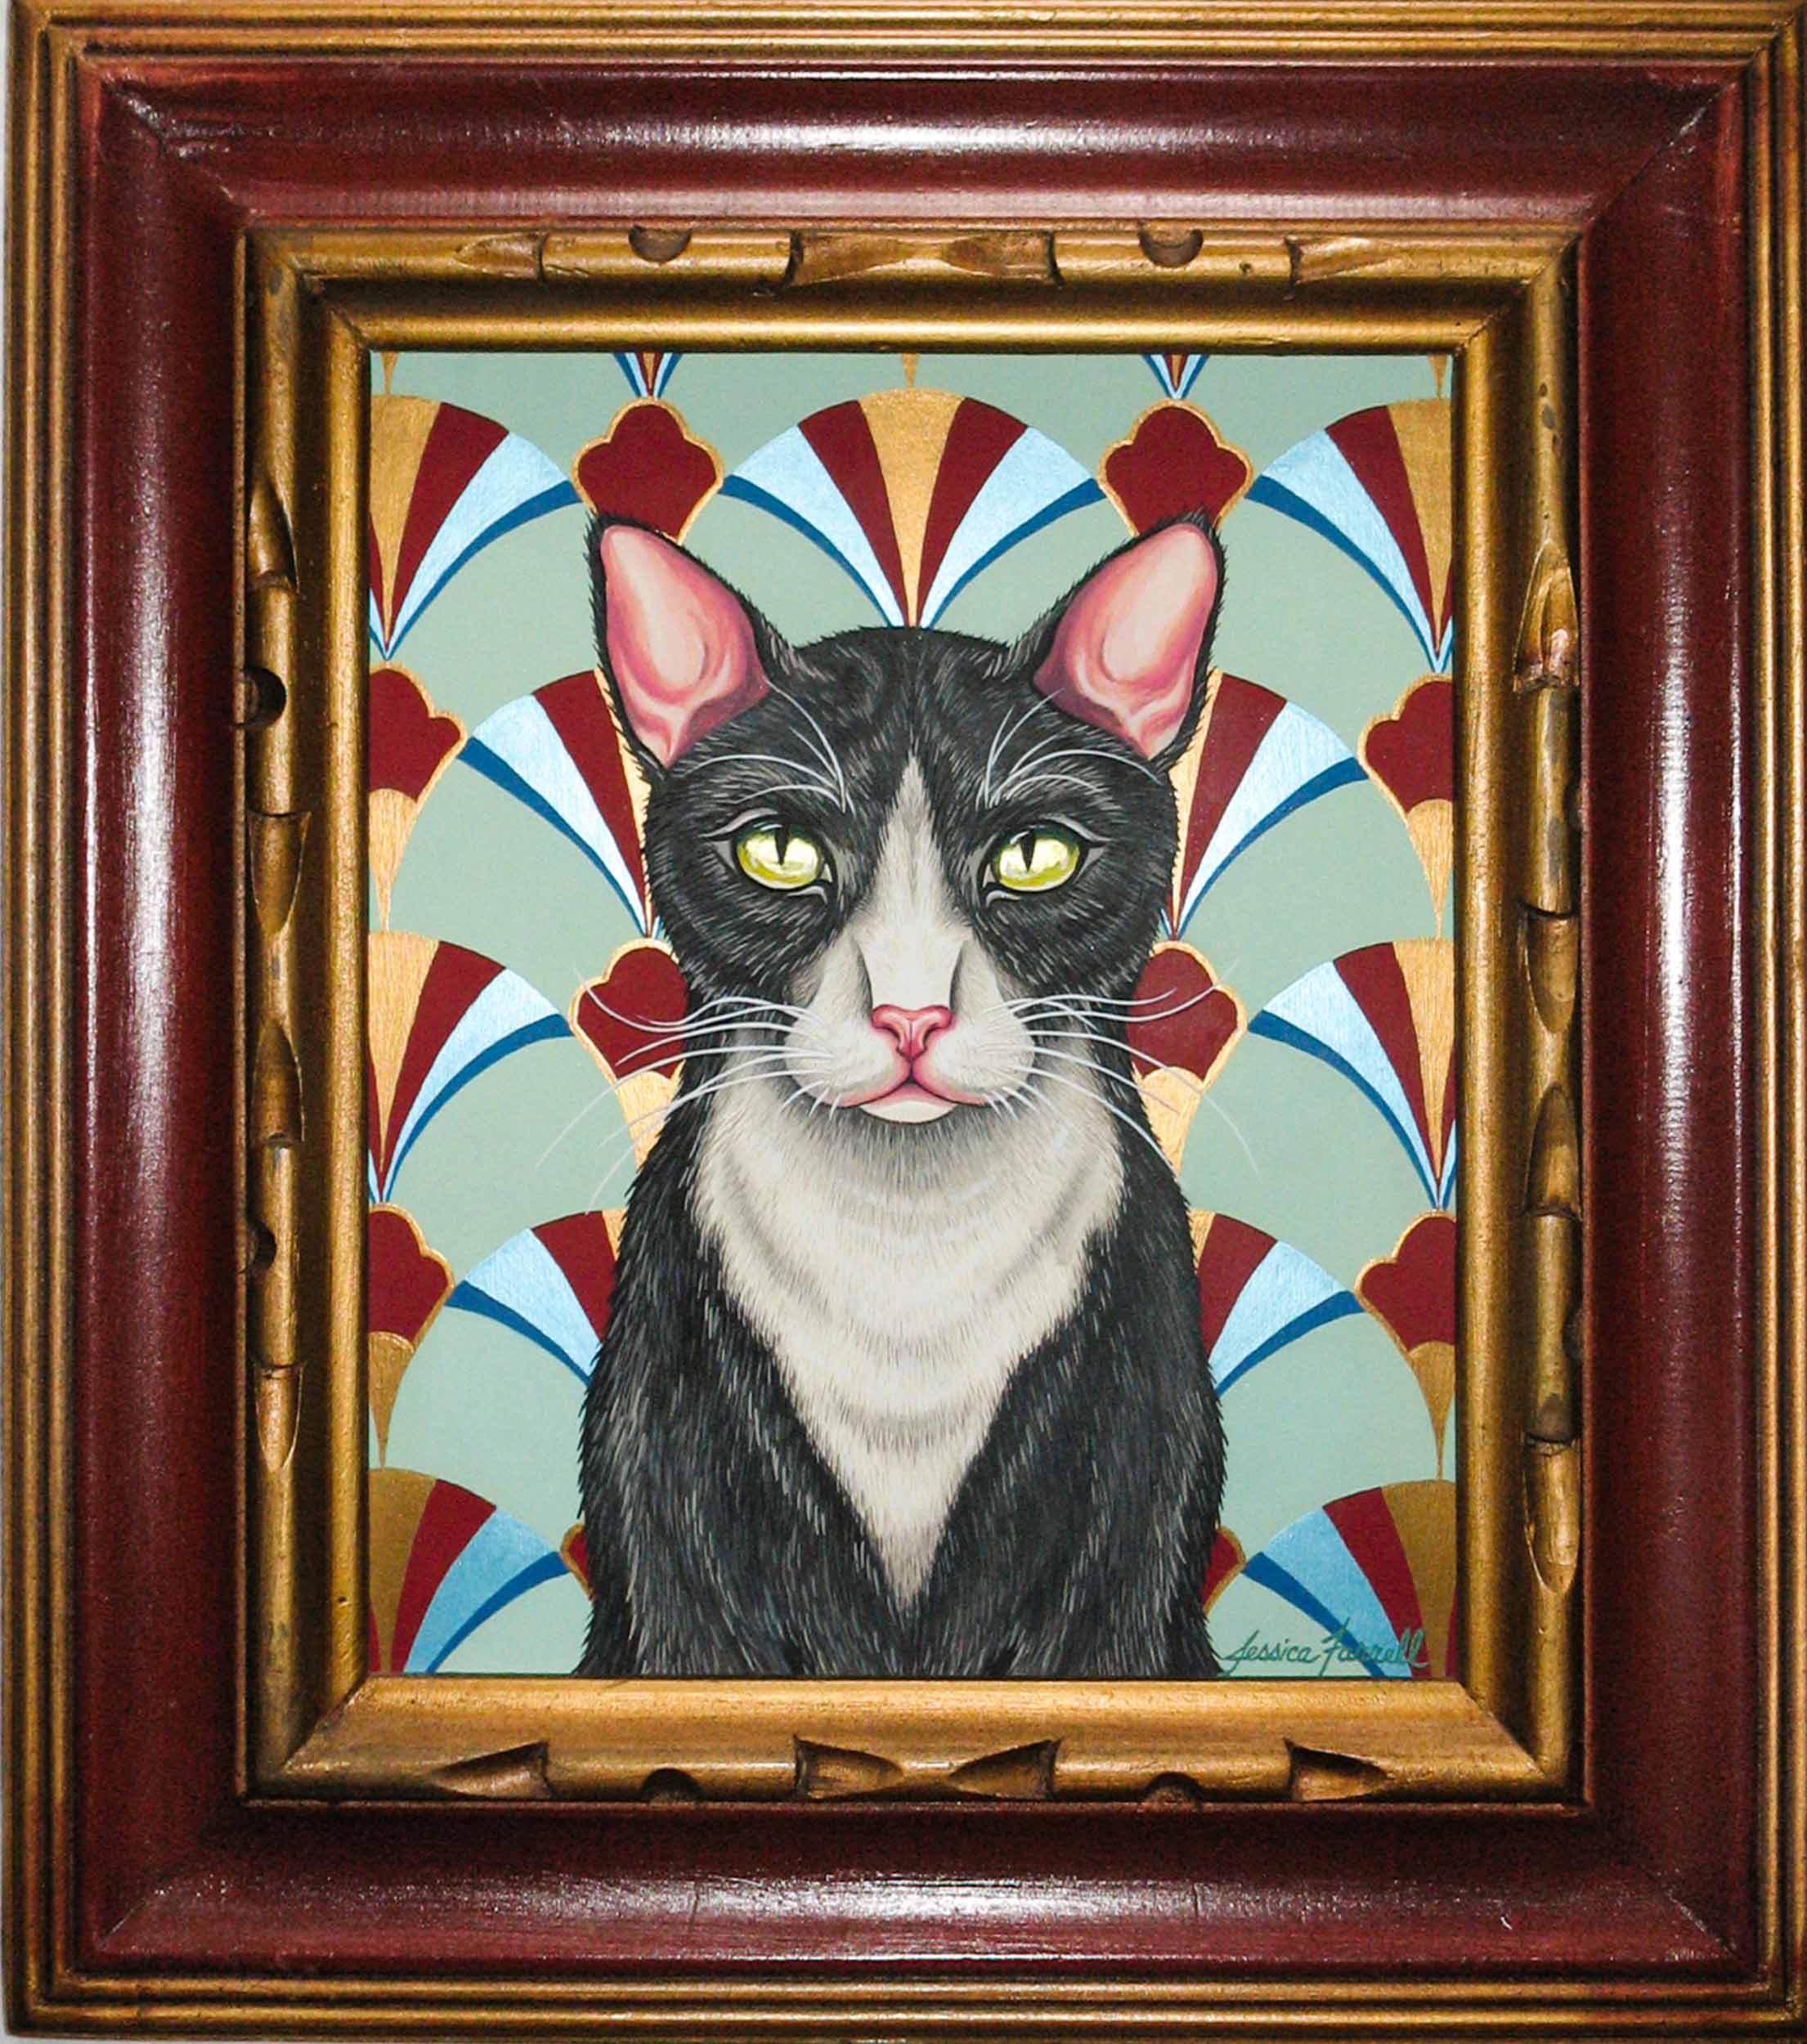   Tuxedo Cat,  Acrylic on wood  with vintage frame, 21 x 18 inches (framed)  (private collection) 